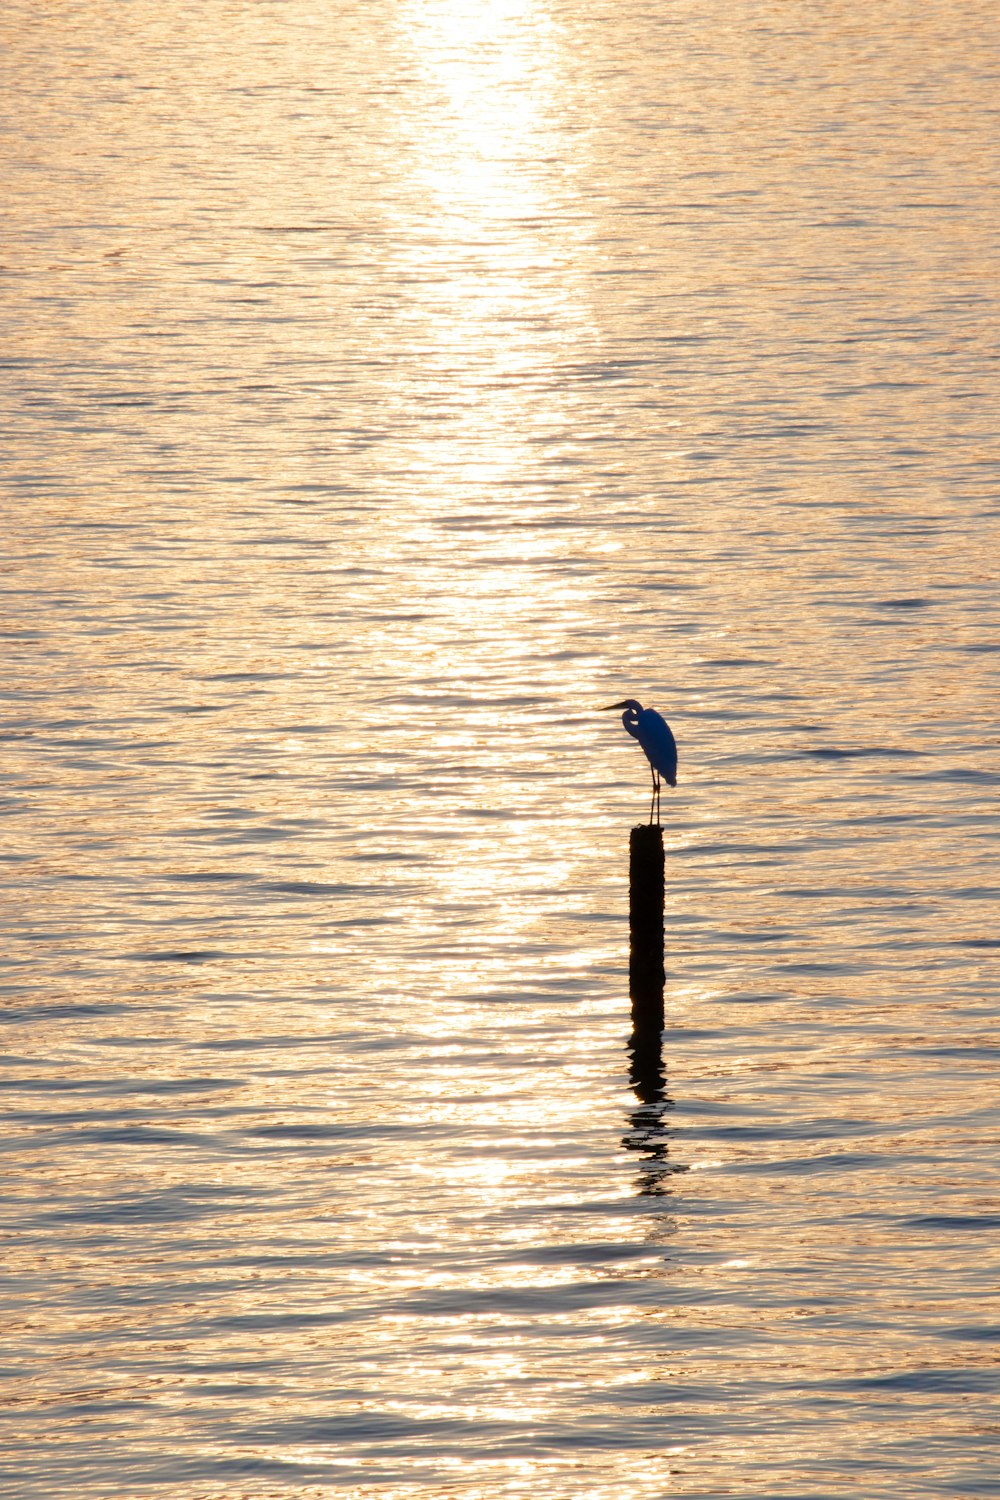 a bird sitting on a post in the middle of a body of water